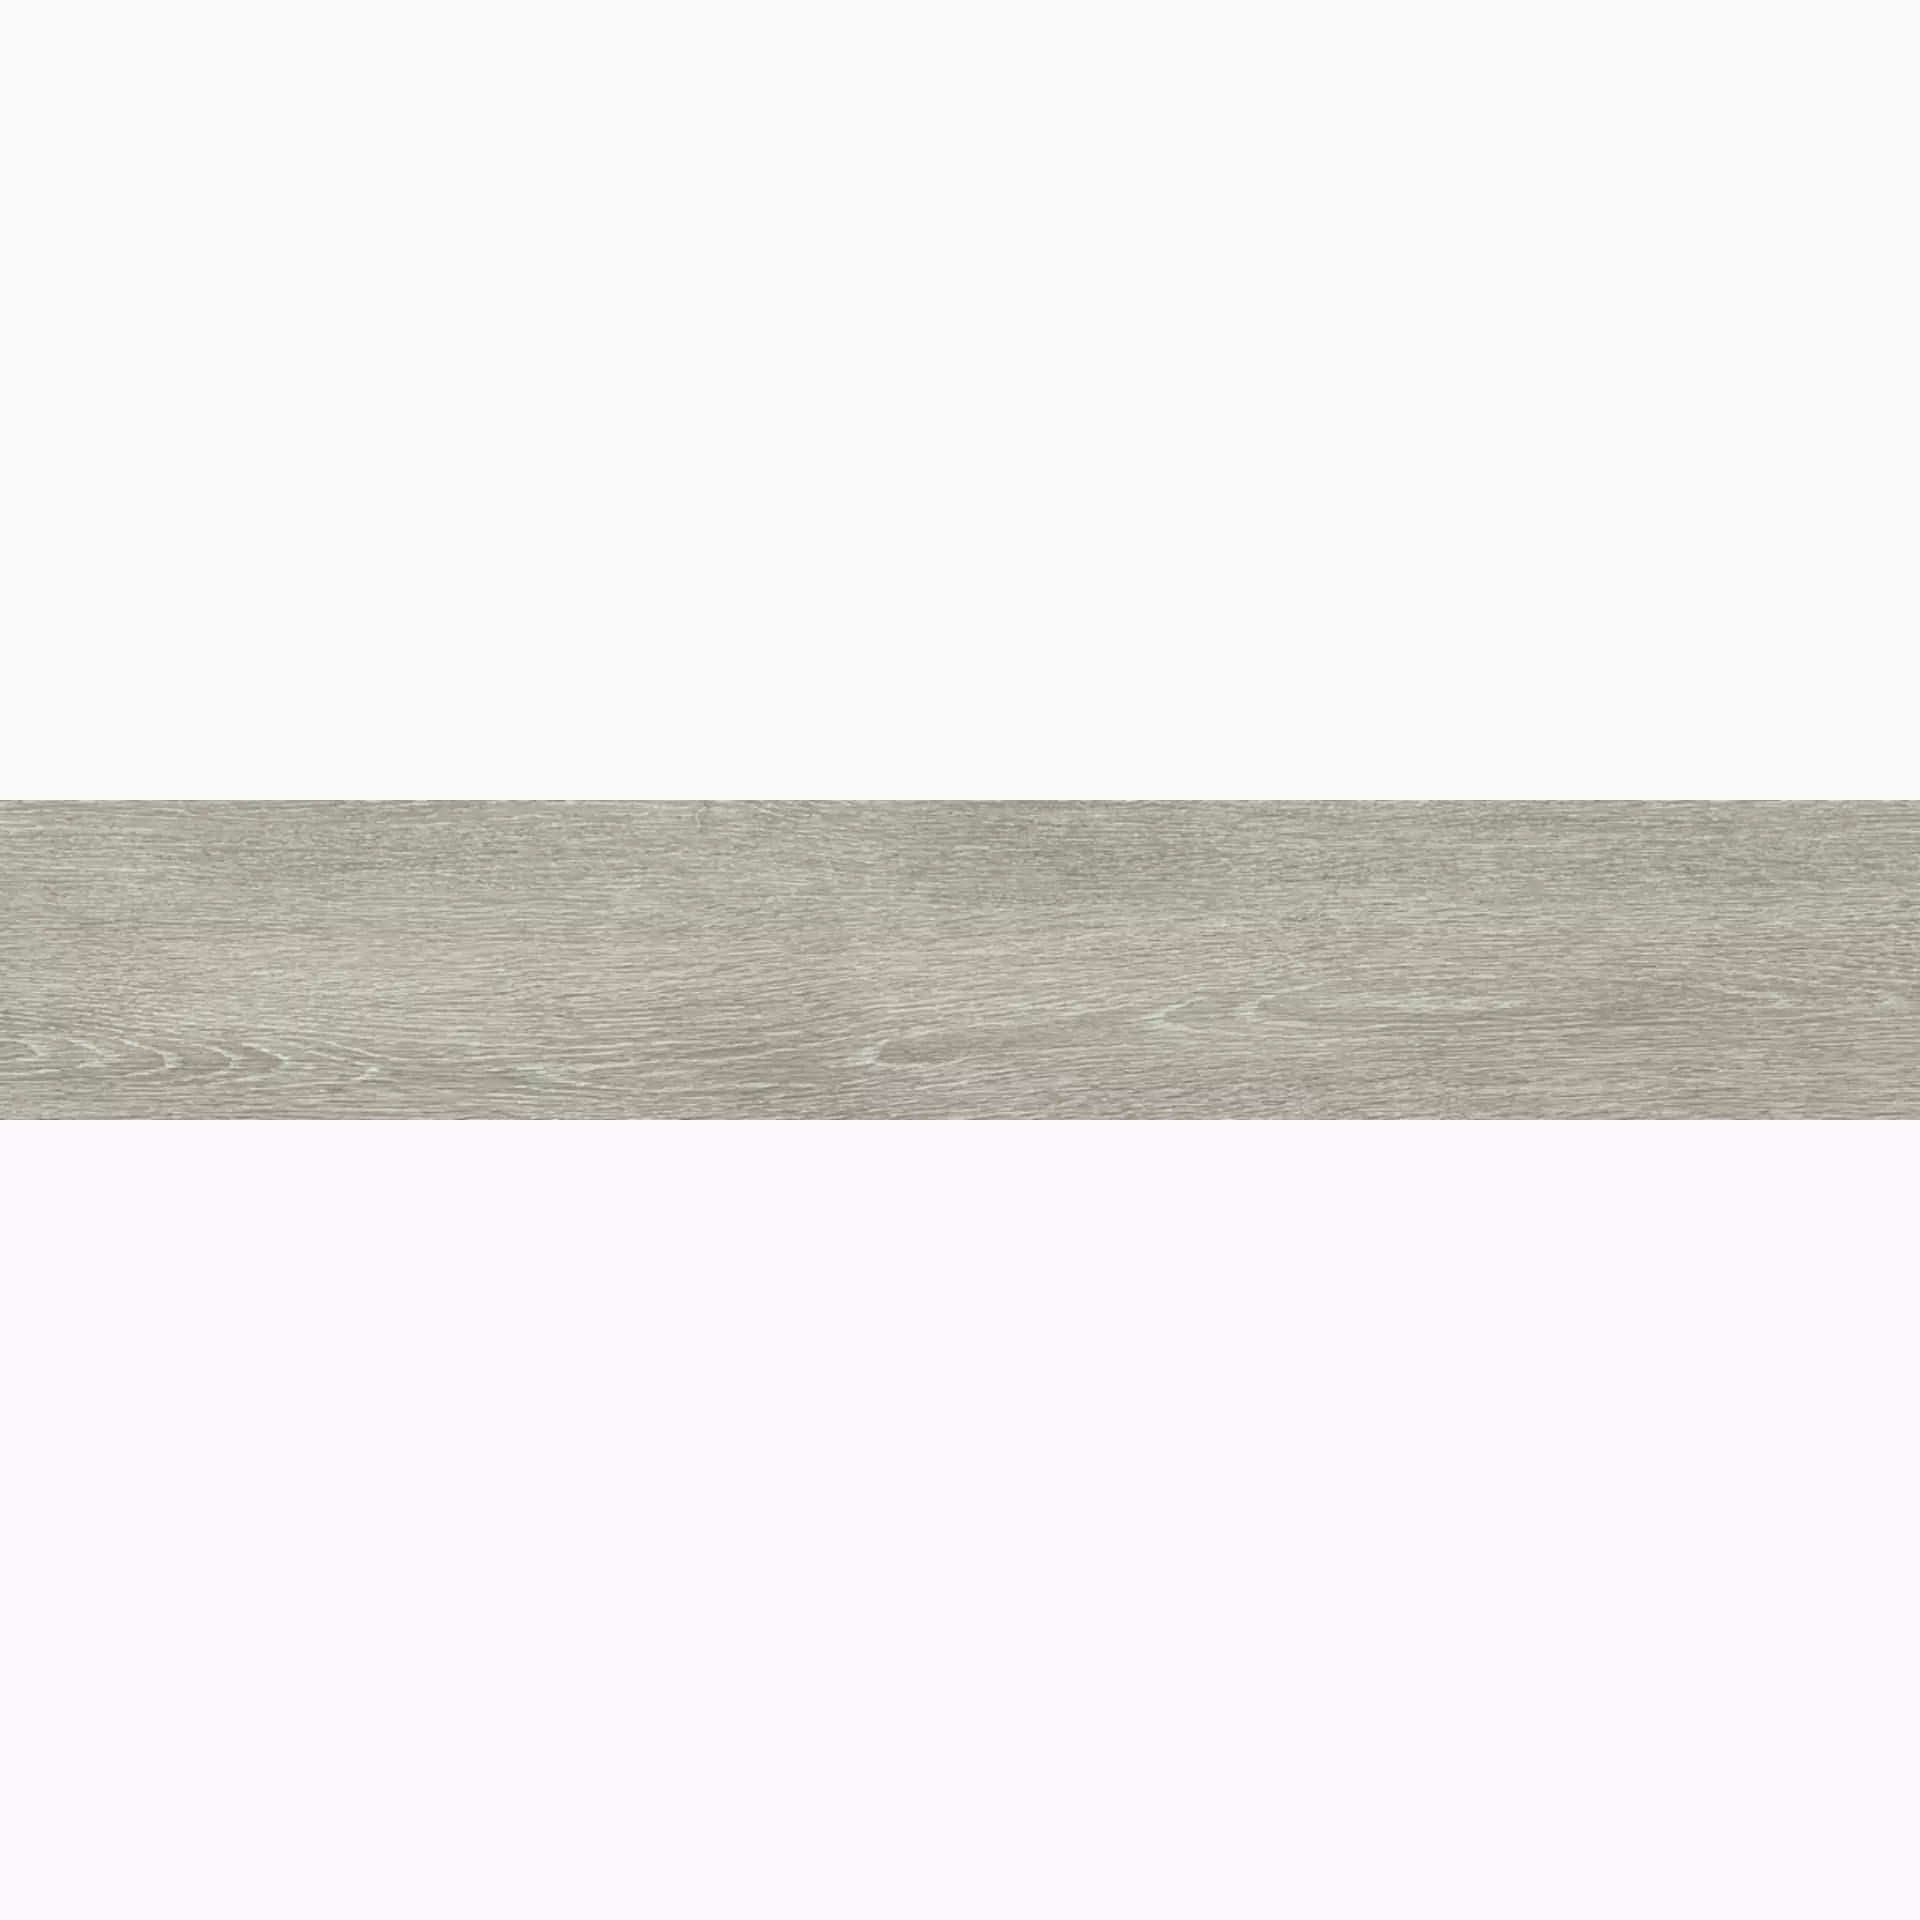 Ergon Tr3Nd Sand Naturale E416 20x120cm rectified 9,5mm